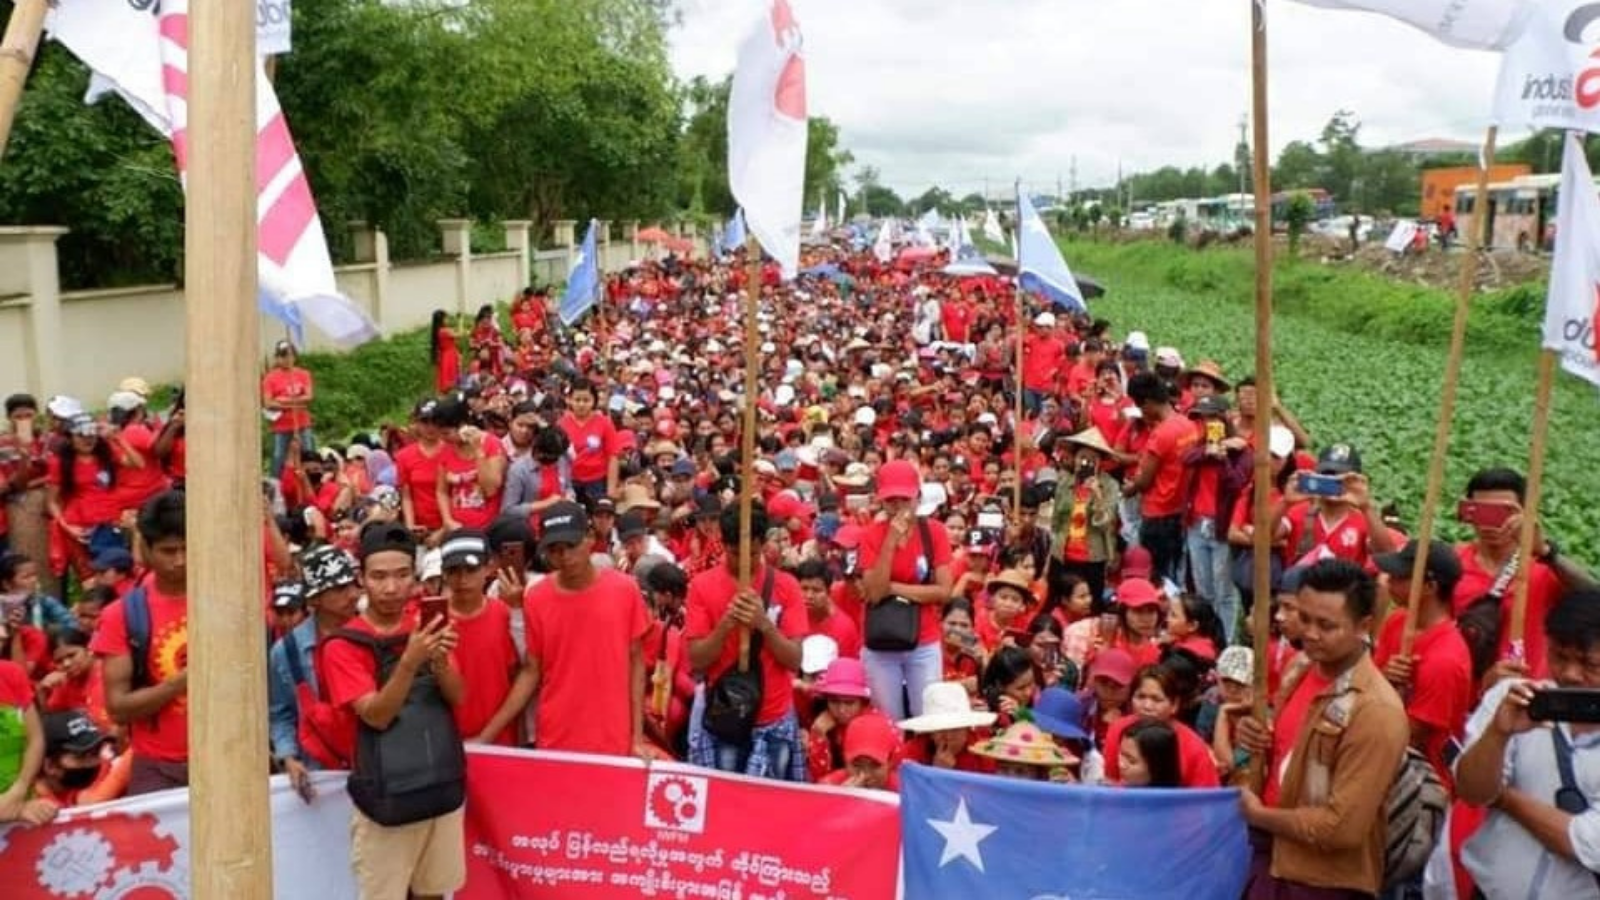 Myanmar: Trade unions call for the immediate withdrawal of EU trade preferences in light of labour and human rights abuses